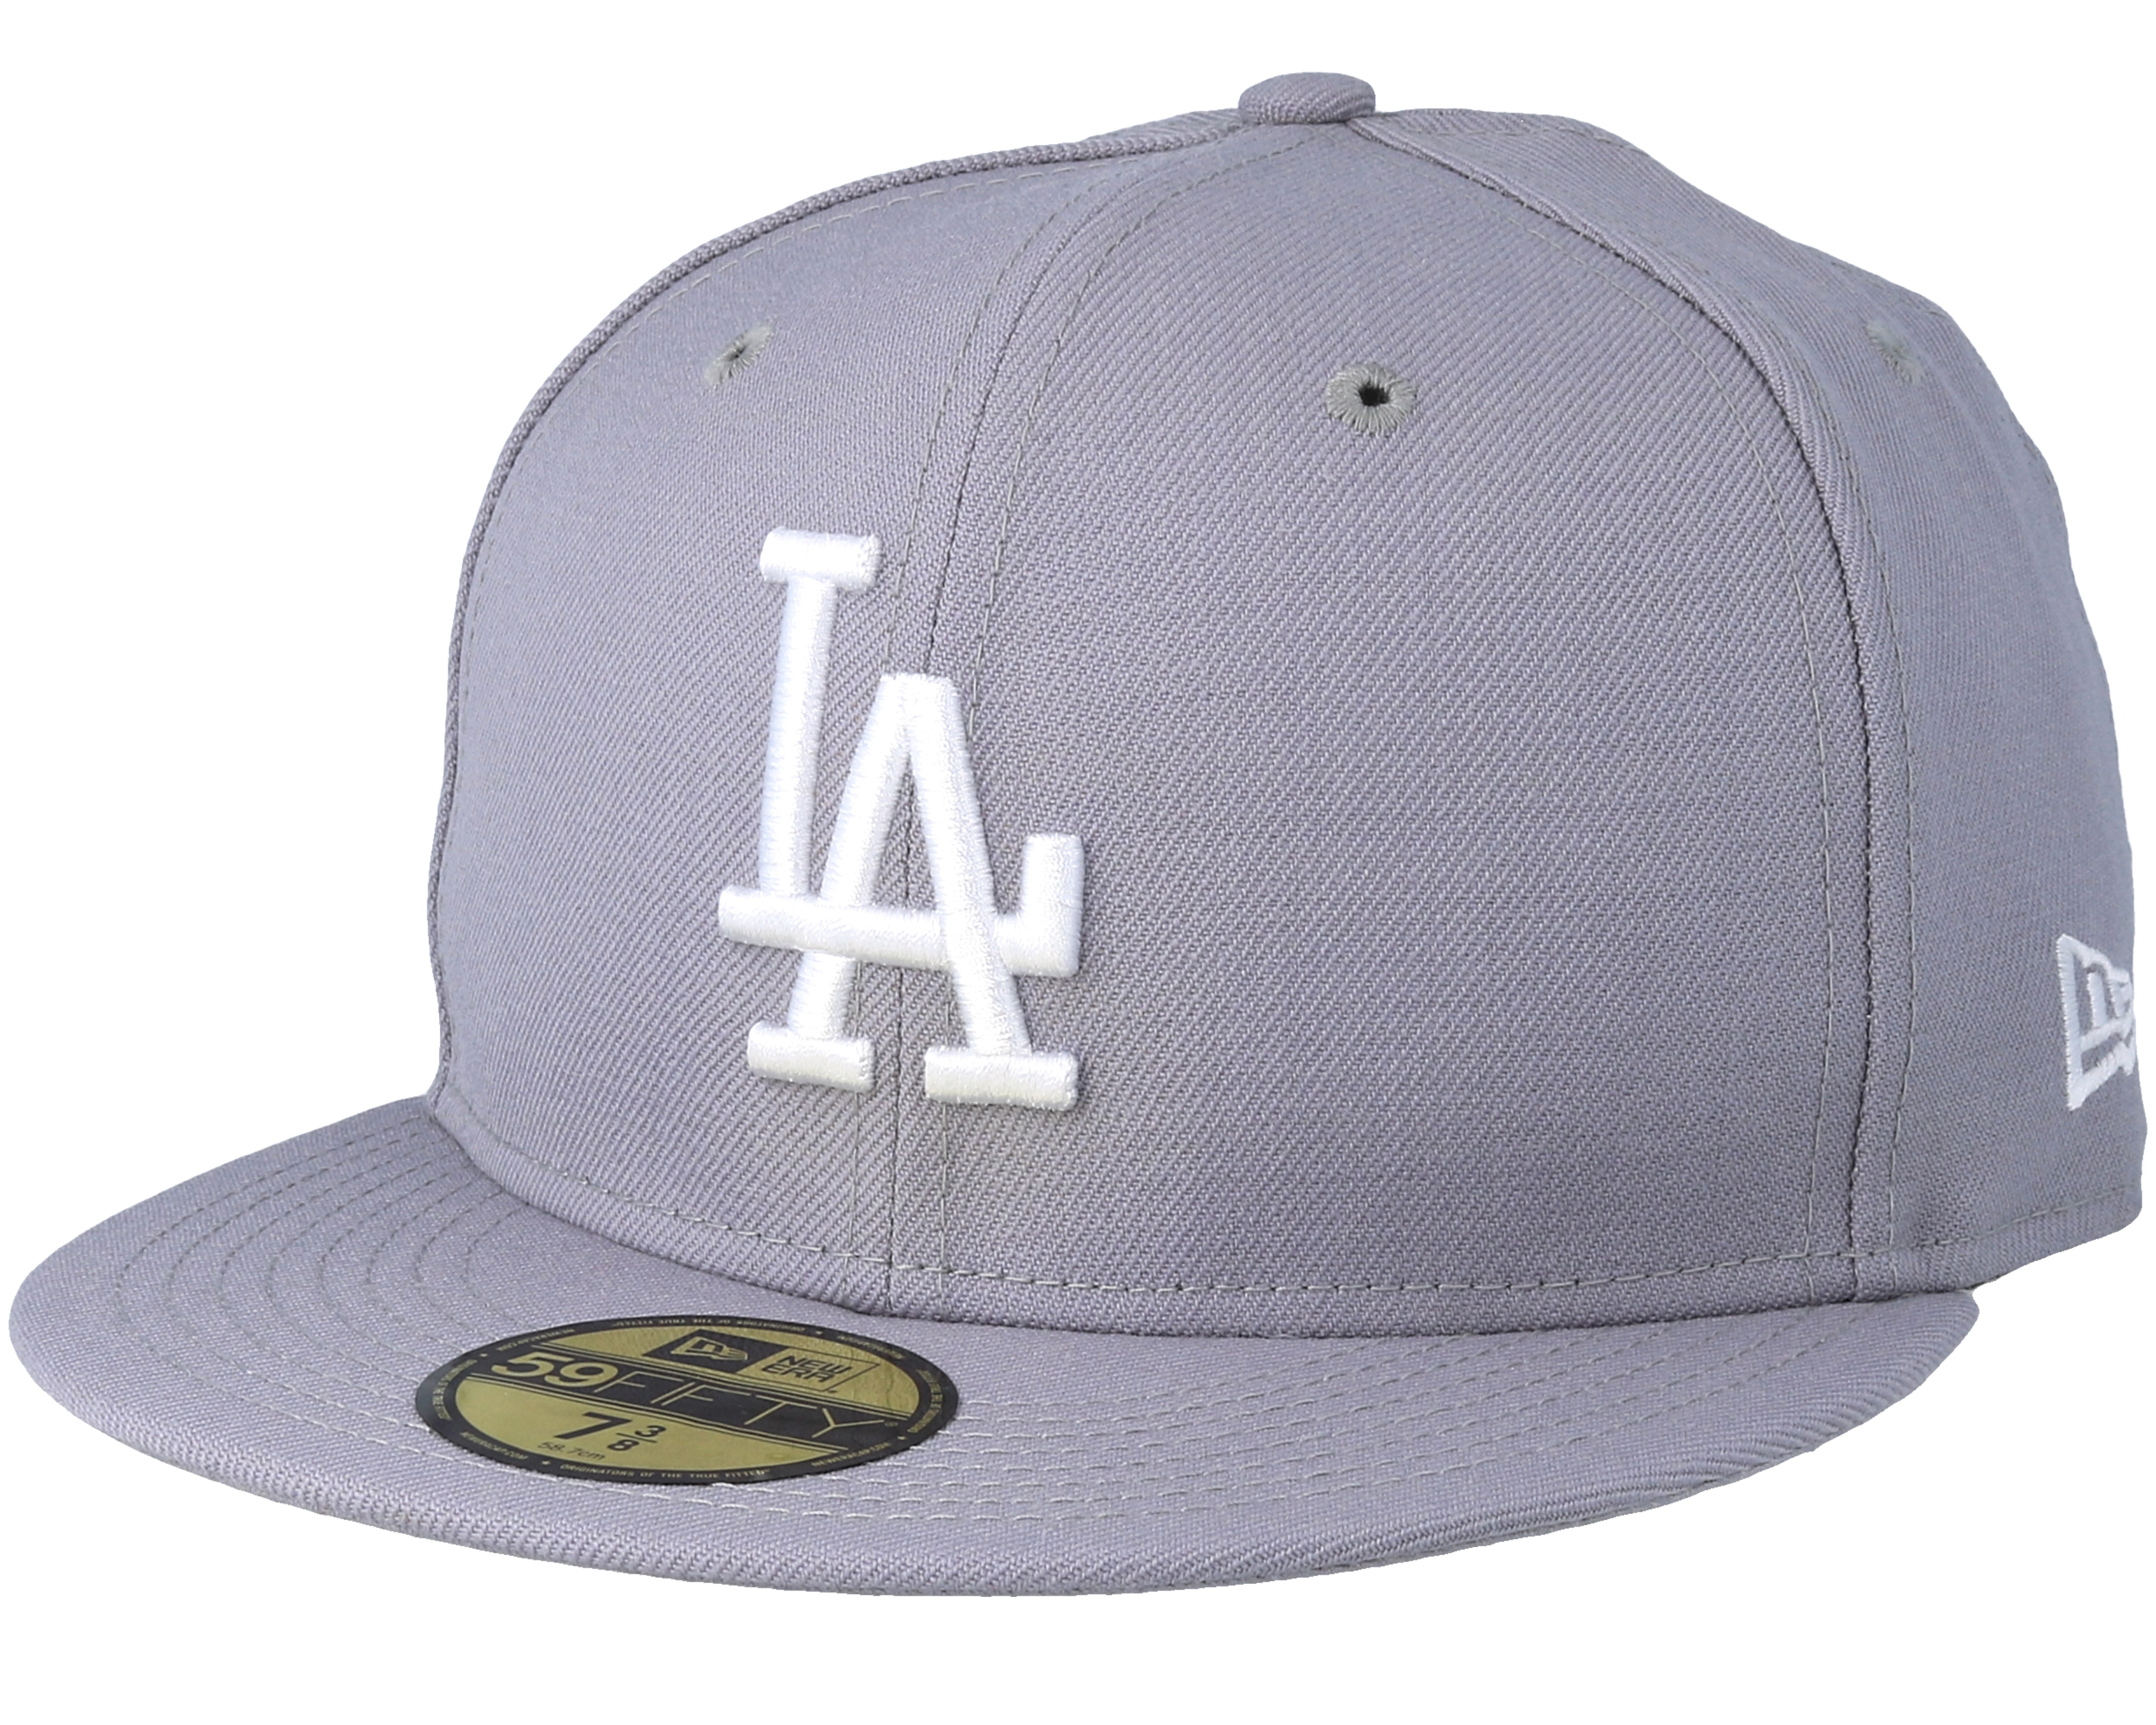 Los Angeles Dodgers 59Fifty Basic Grey Fitted - New Era бейсболку